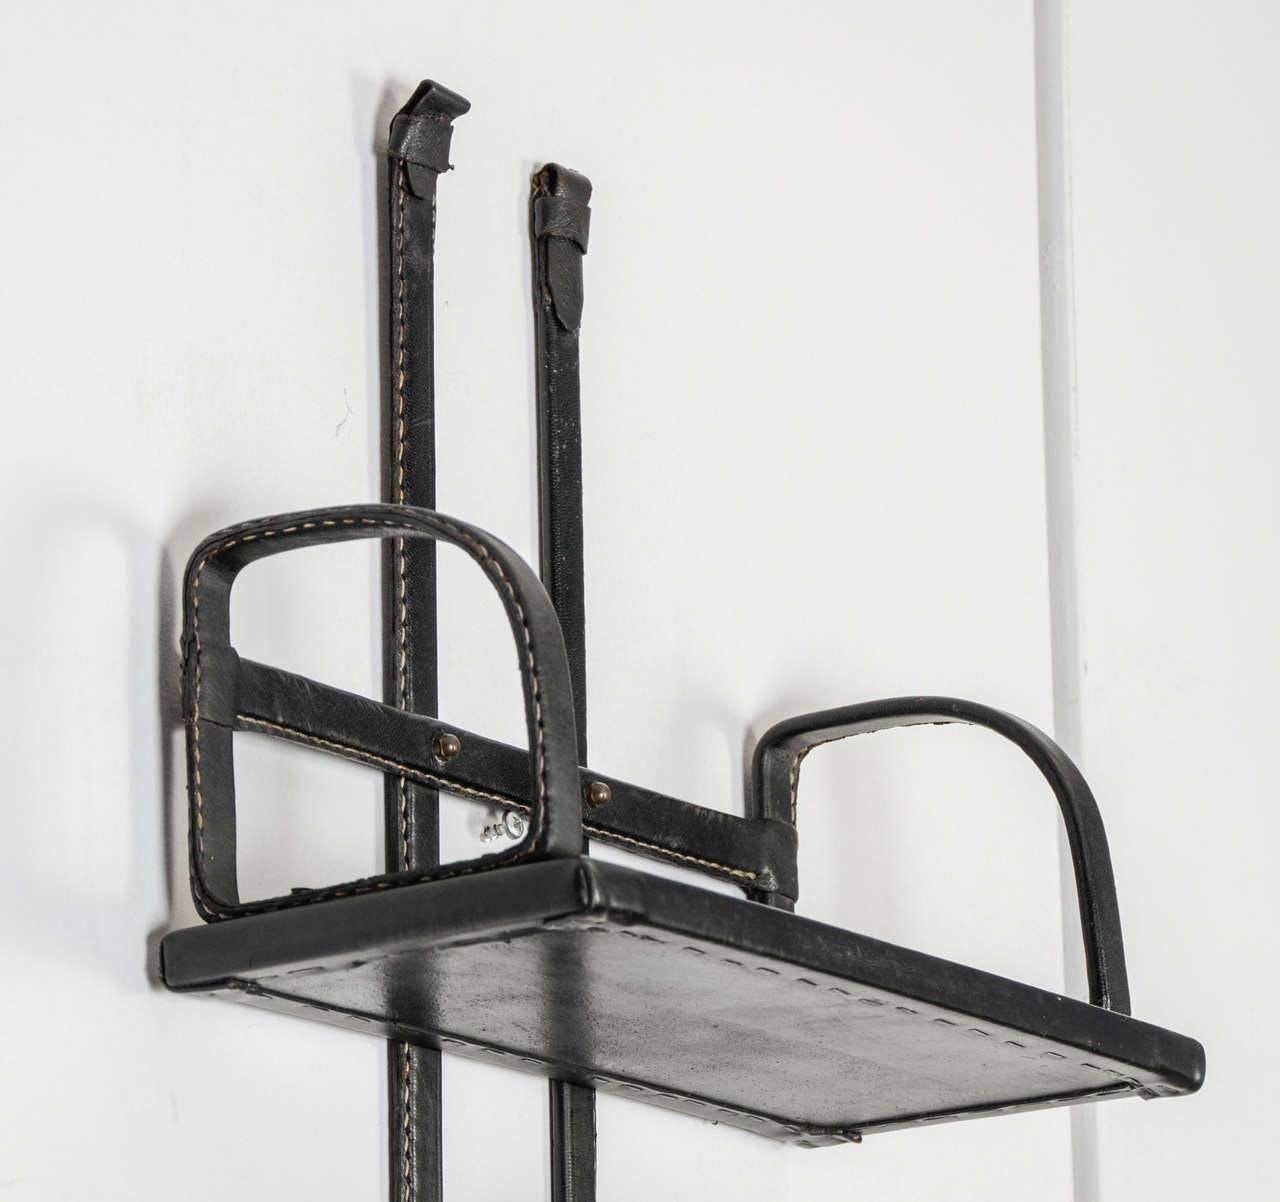 1950 wall book rack in black stitched leather by Jacques Adnet.